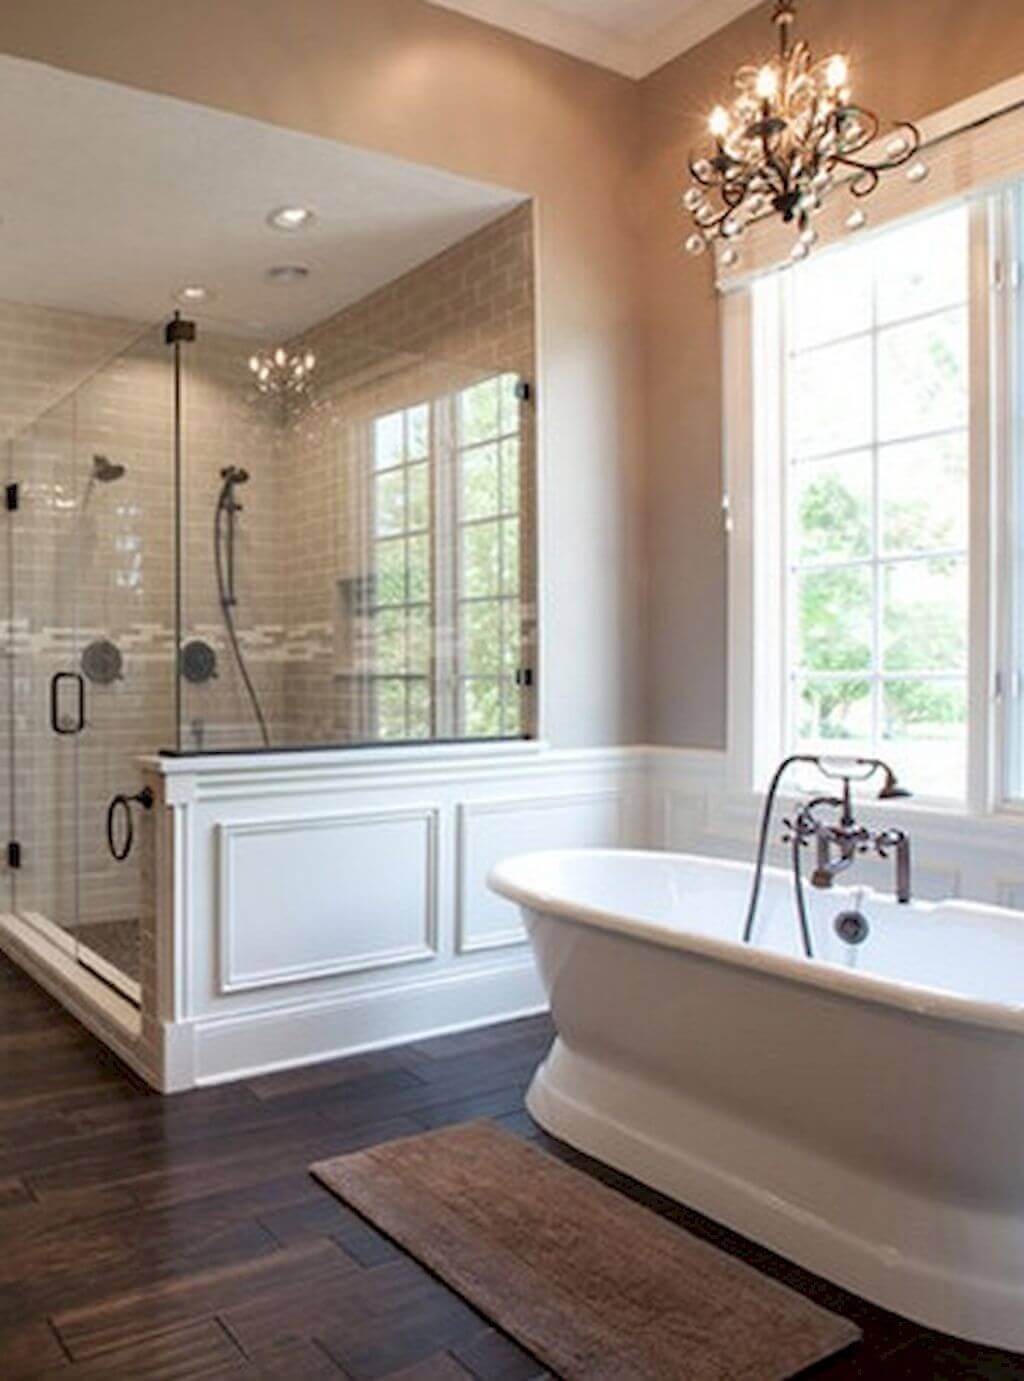 French Country Decor Bathroom with Nature Backdrop - Harptimes.com